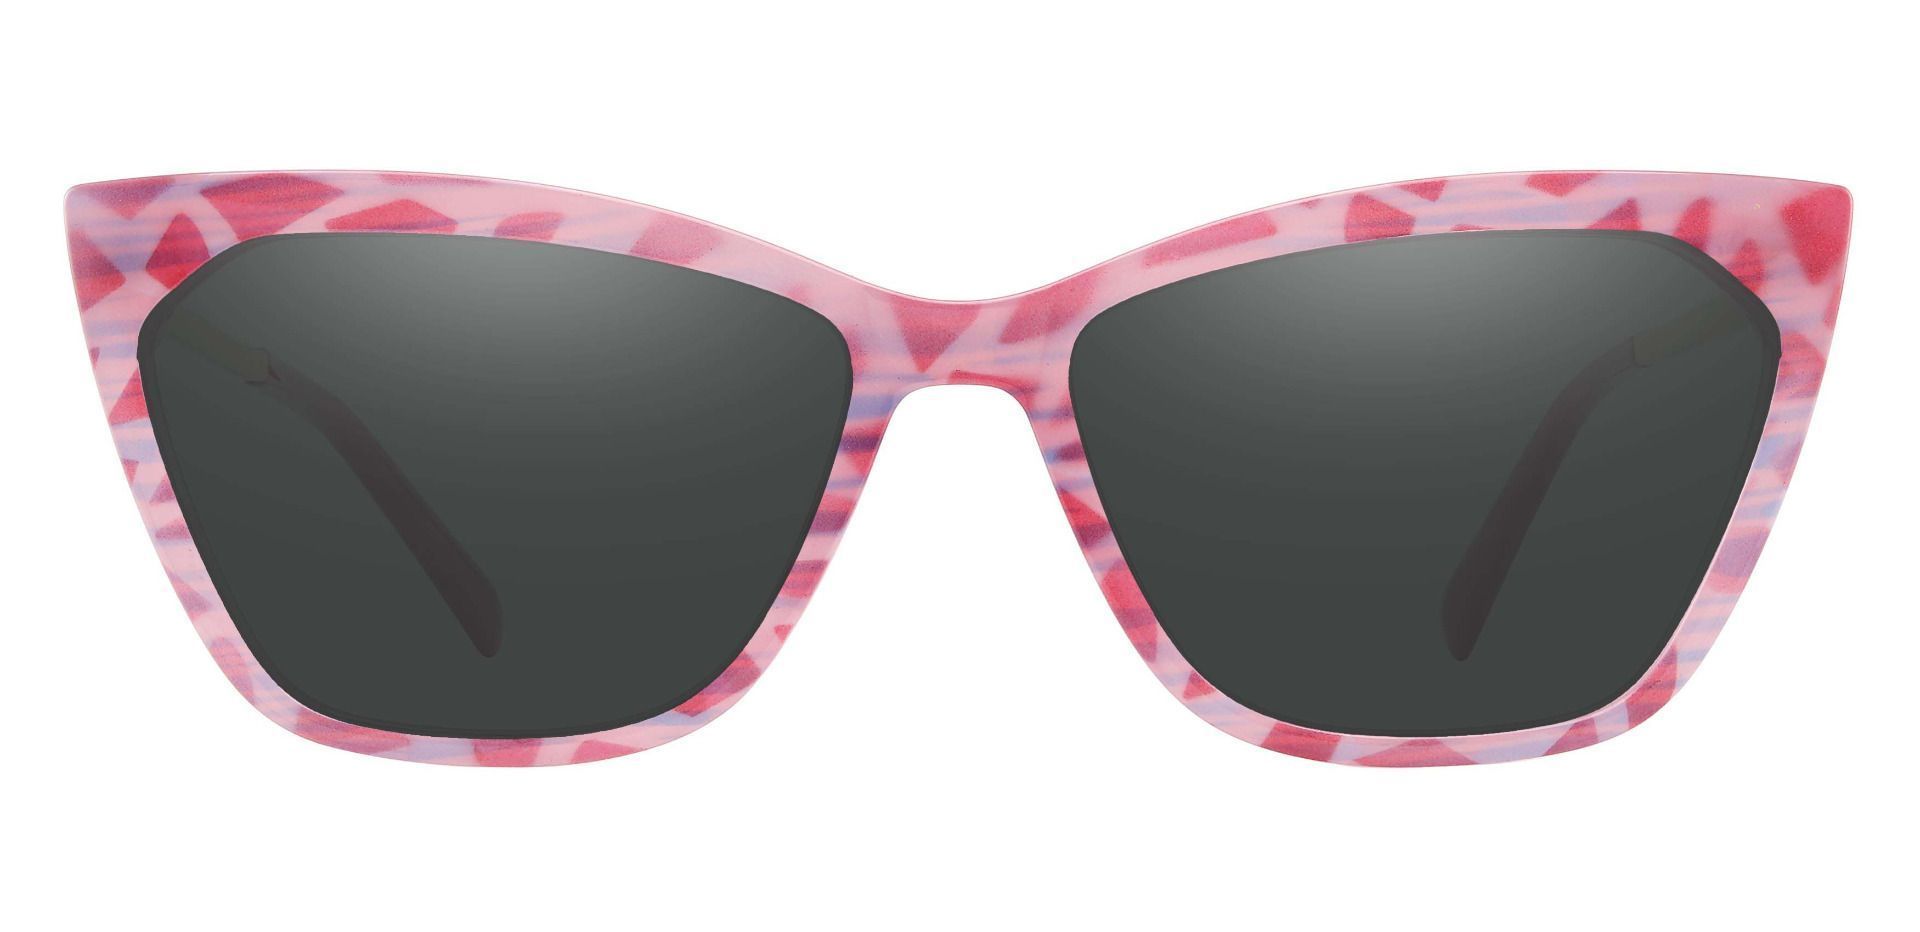 Addison Cat Eye Lined Bifocal Sunglasses - Pink Frame With Gray Lenses